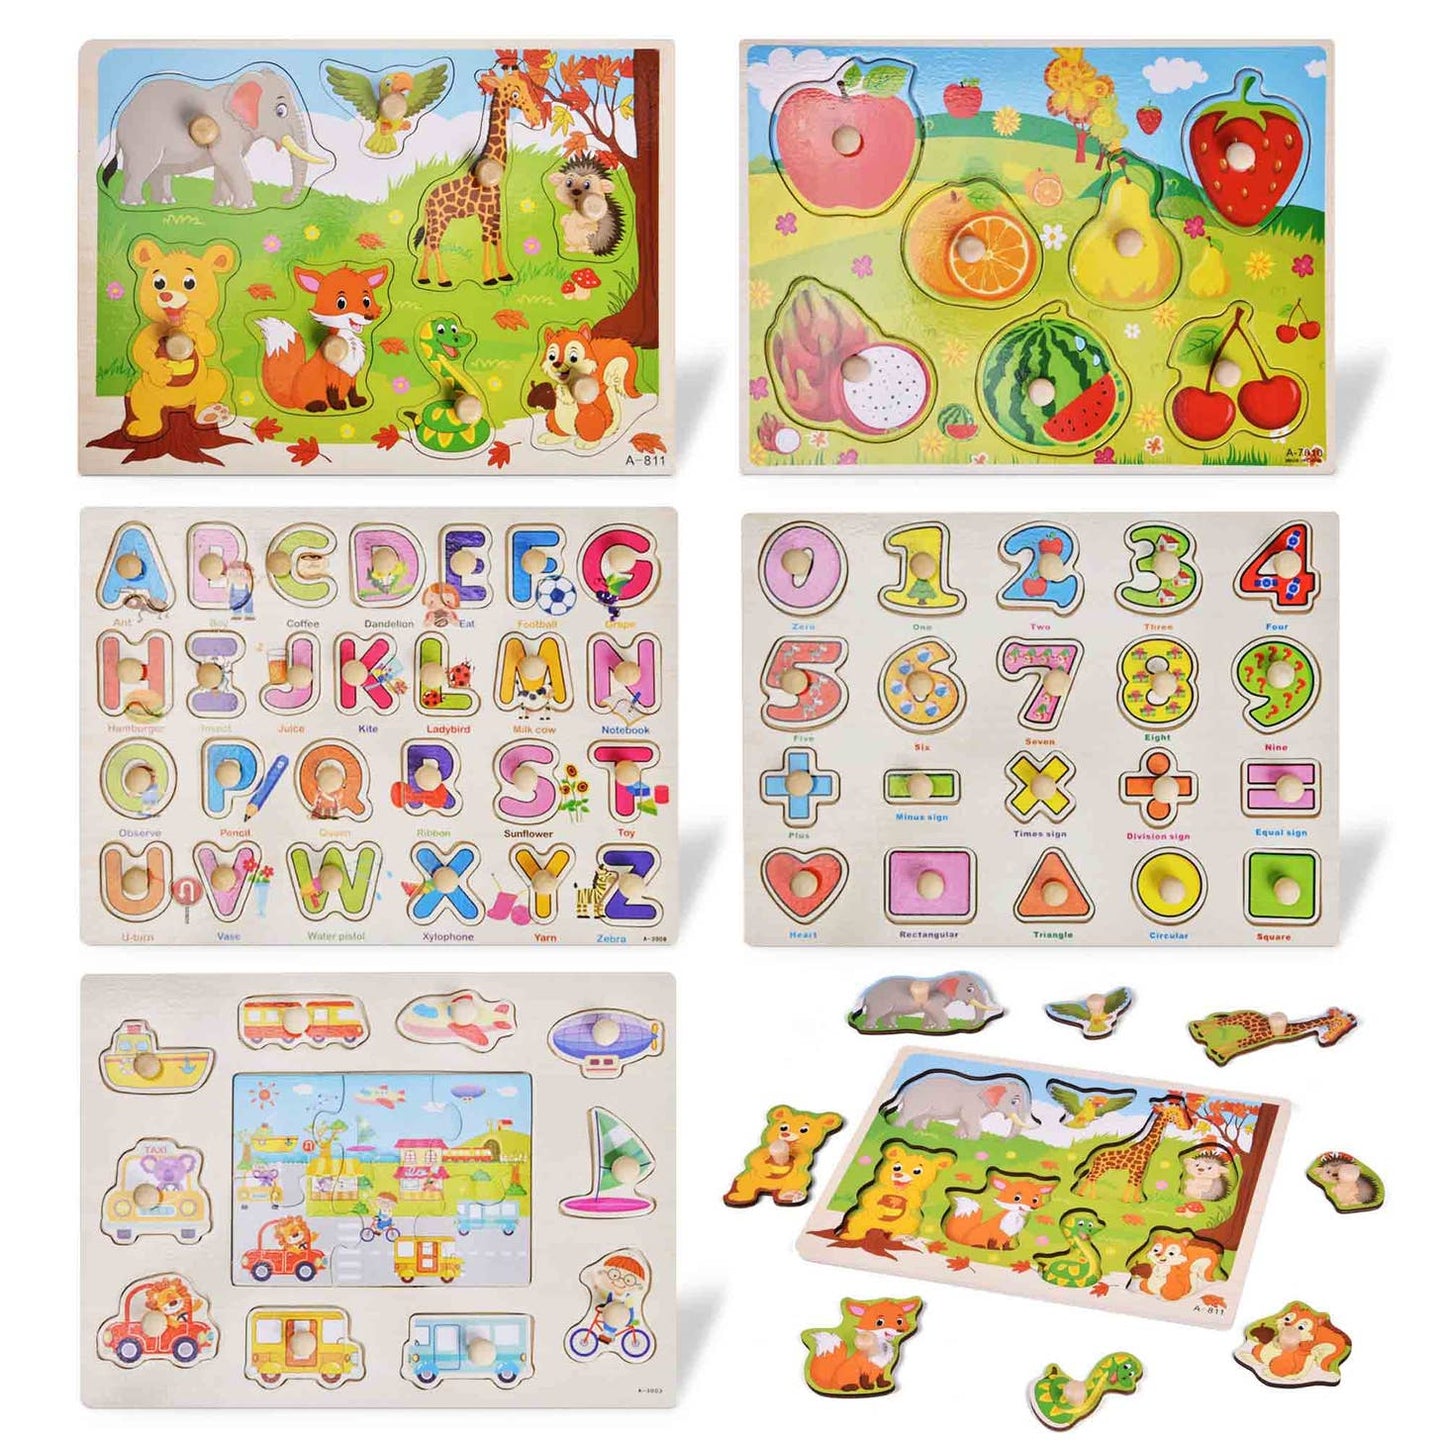 5 Pack of Wooden Peg Puzzles